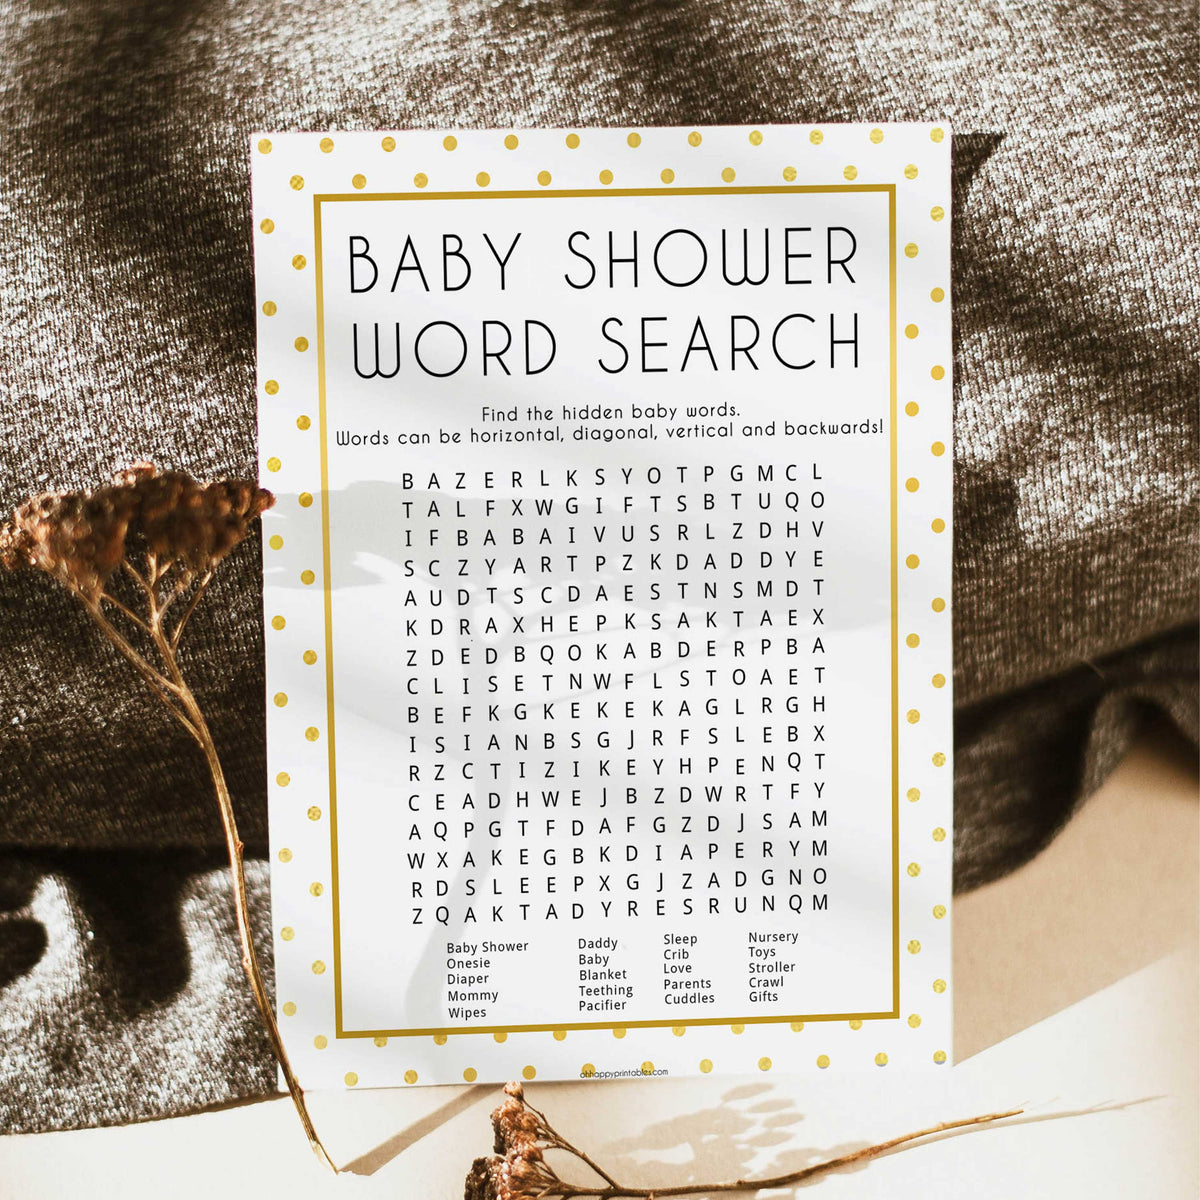 baby shower word search, baby word search game, Printable baby shower games, baby gold dots fun baby games, baby shower games, fun baby shower ideas, top baby shower ideas, gold glitter shower baby shower, friends baby shower ideas